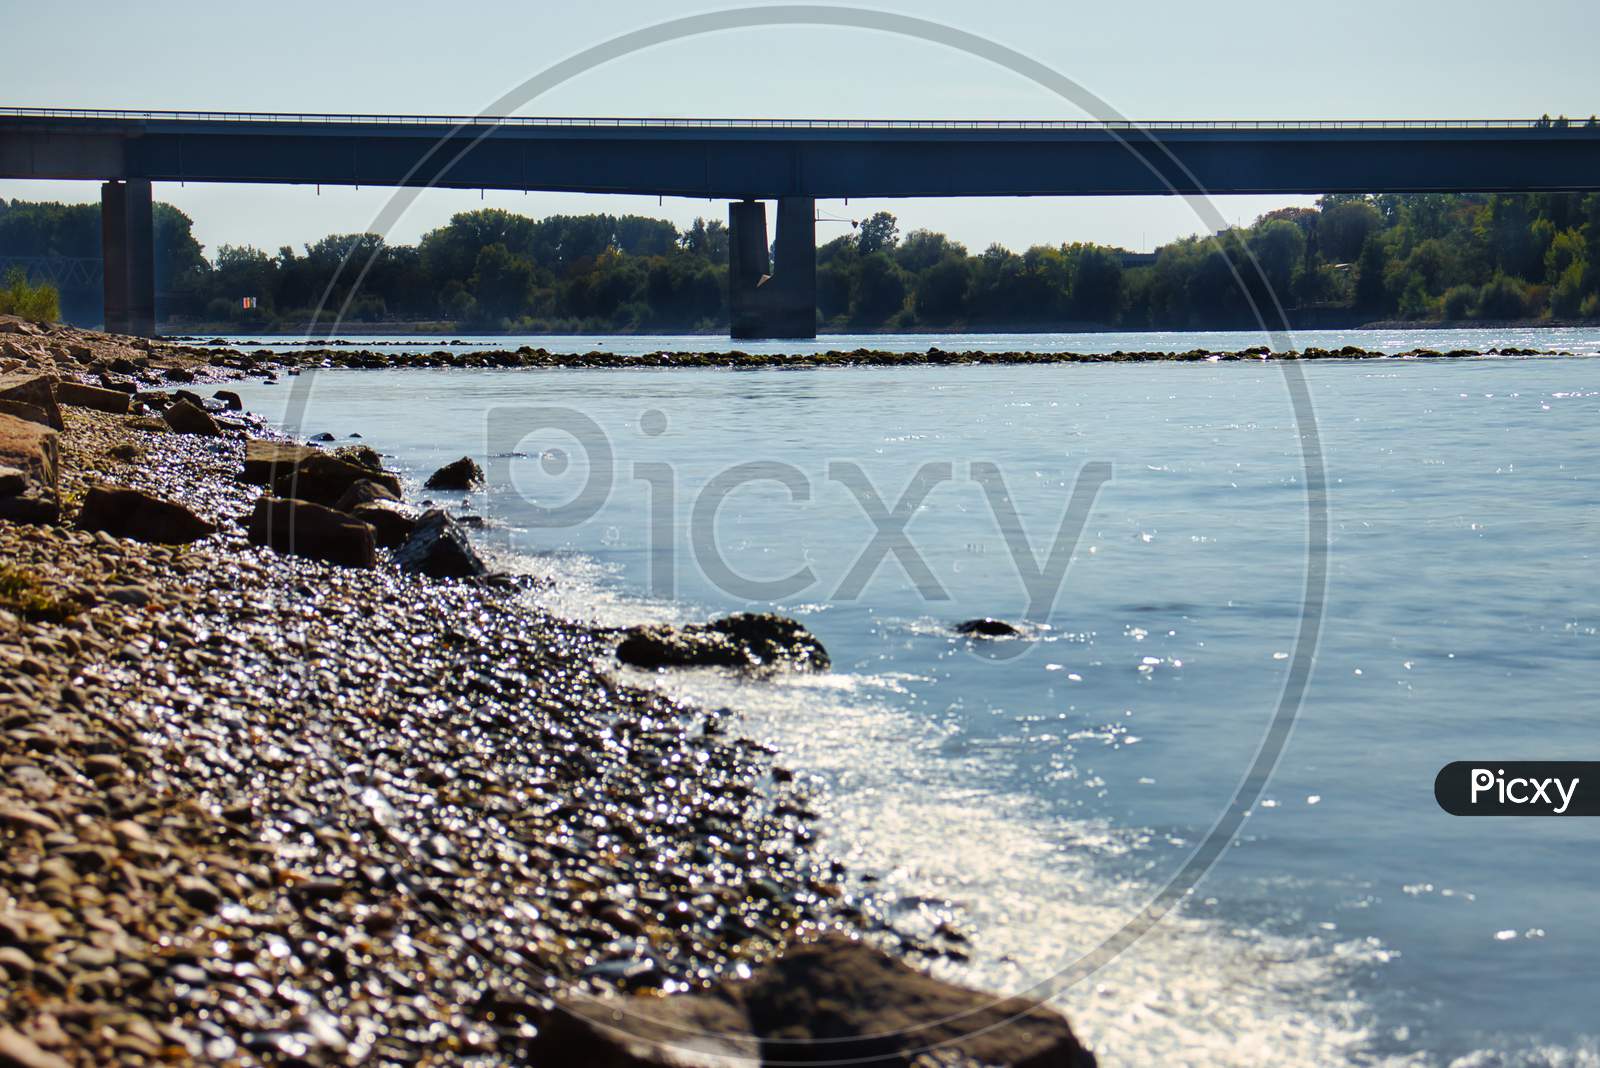 Water Hitting The Rocky Shore With A Bridge In The Background On A Warm Summer Day In Germany.